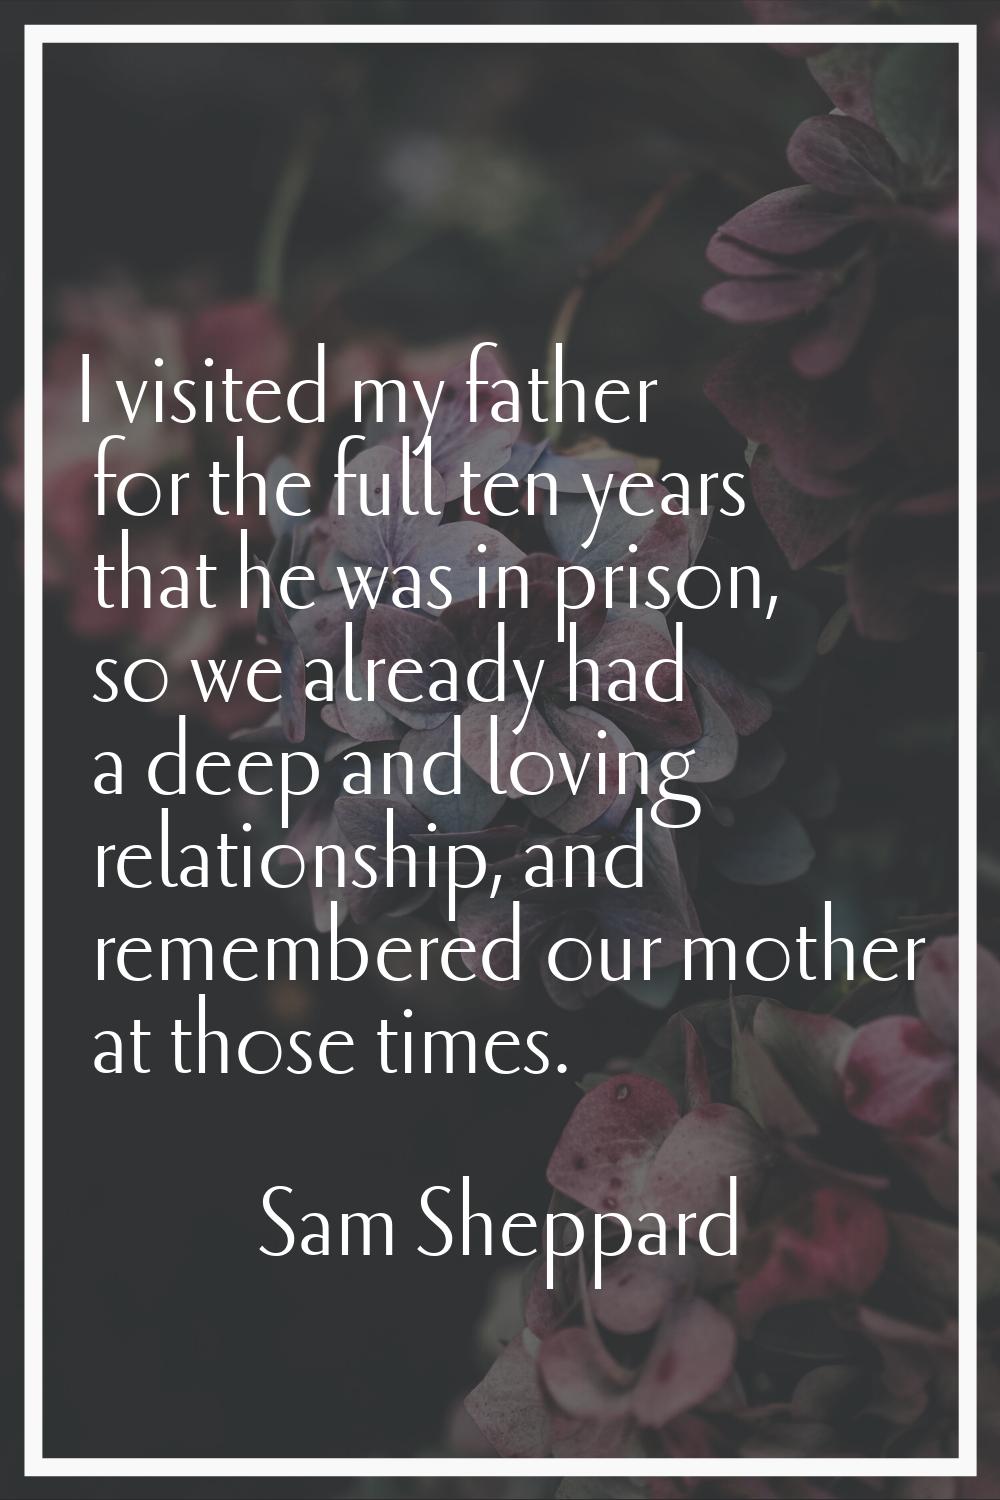 I visited my father for the full ten years that he was in prison, so we already had a deep and lovi